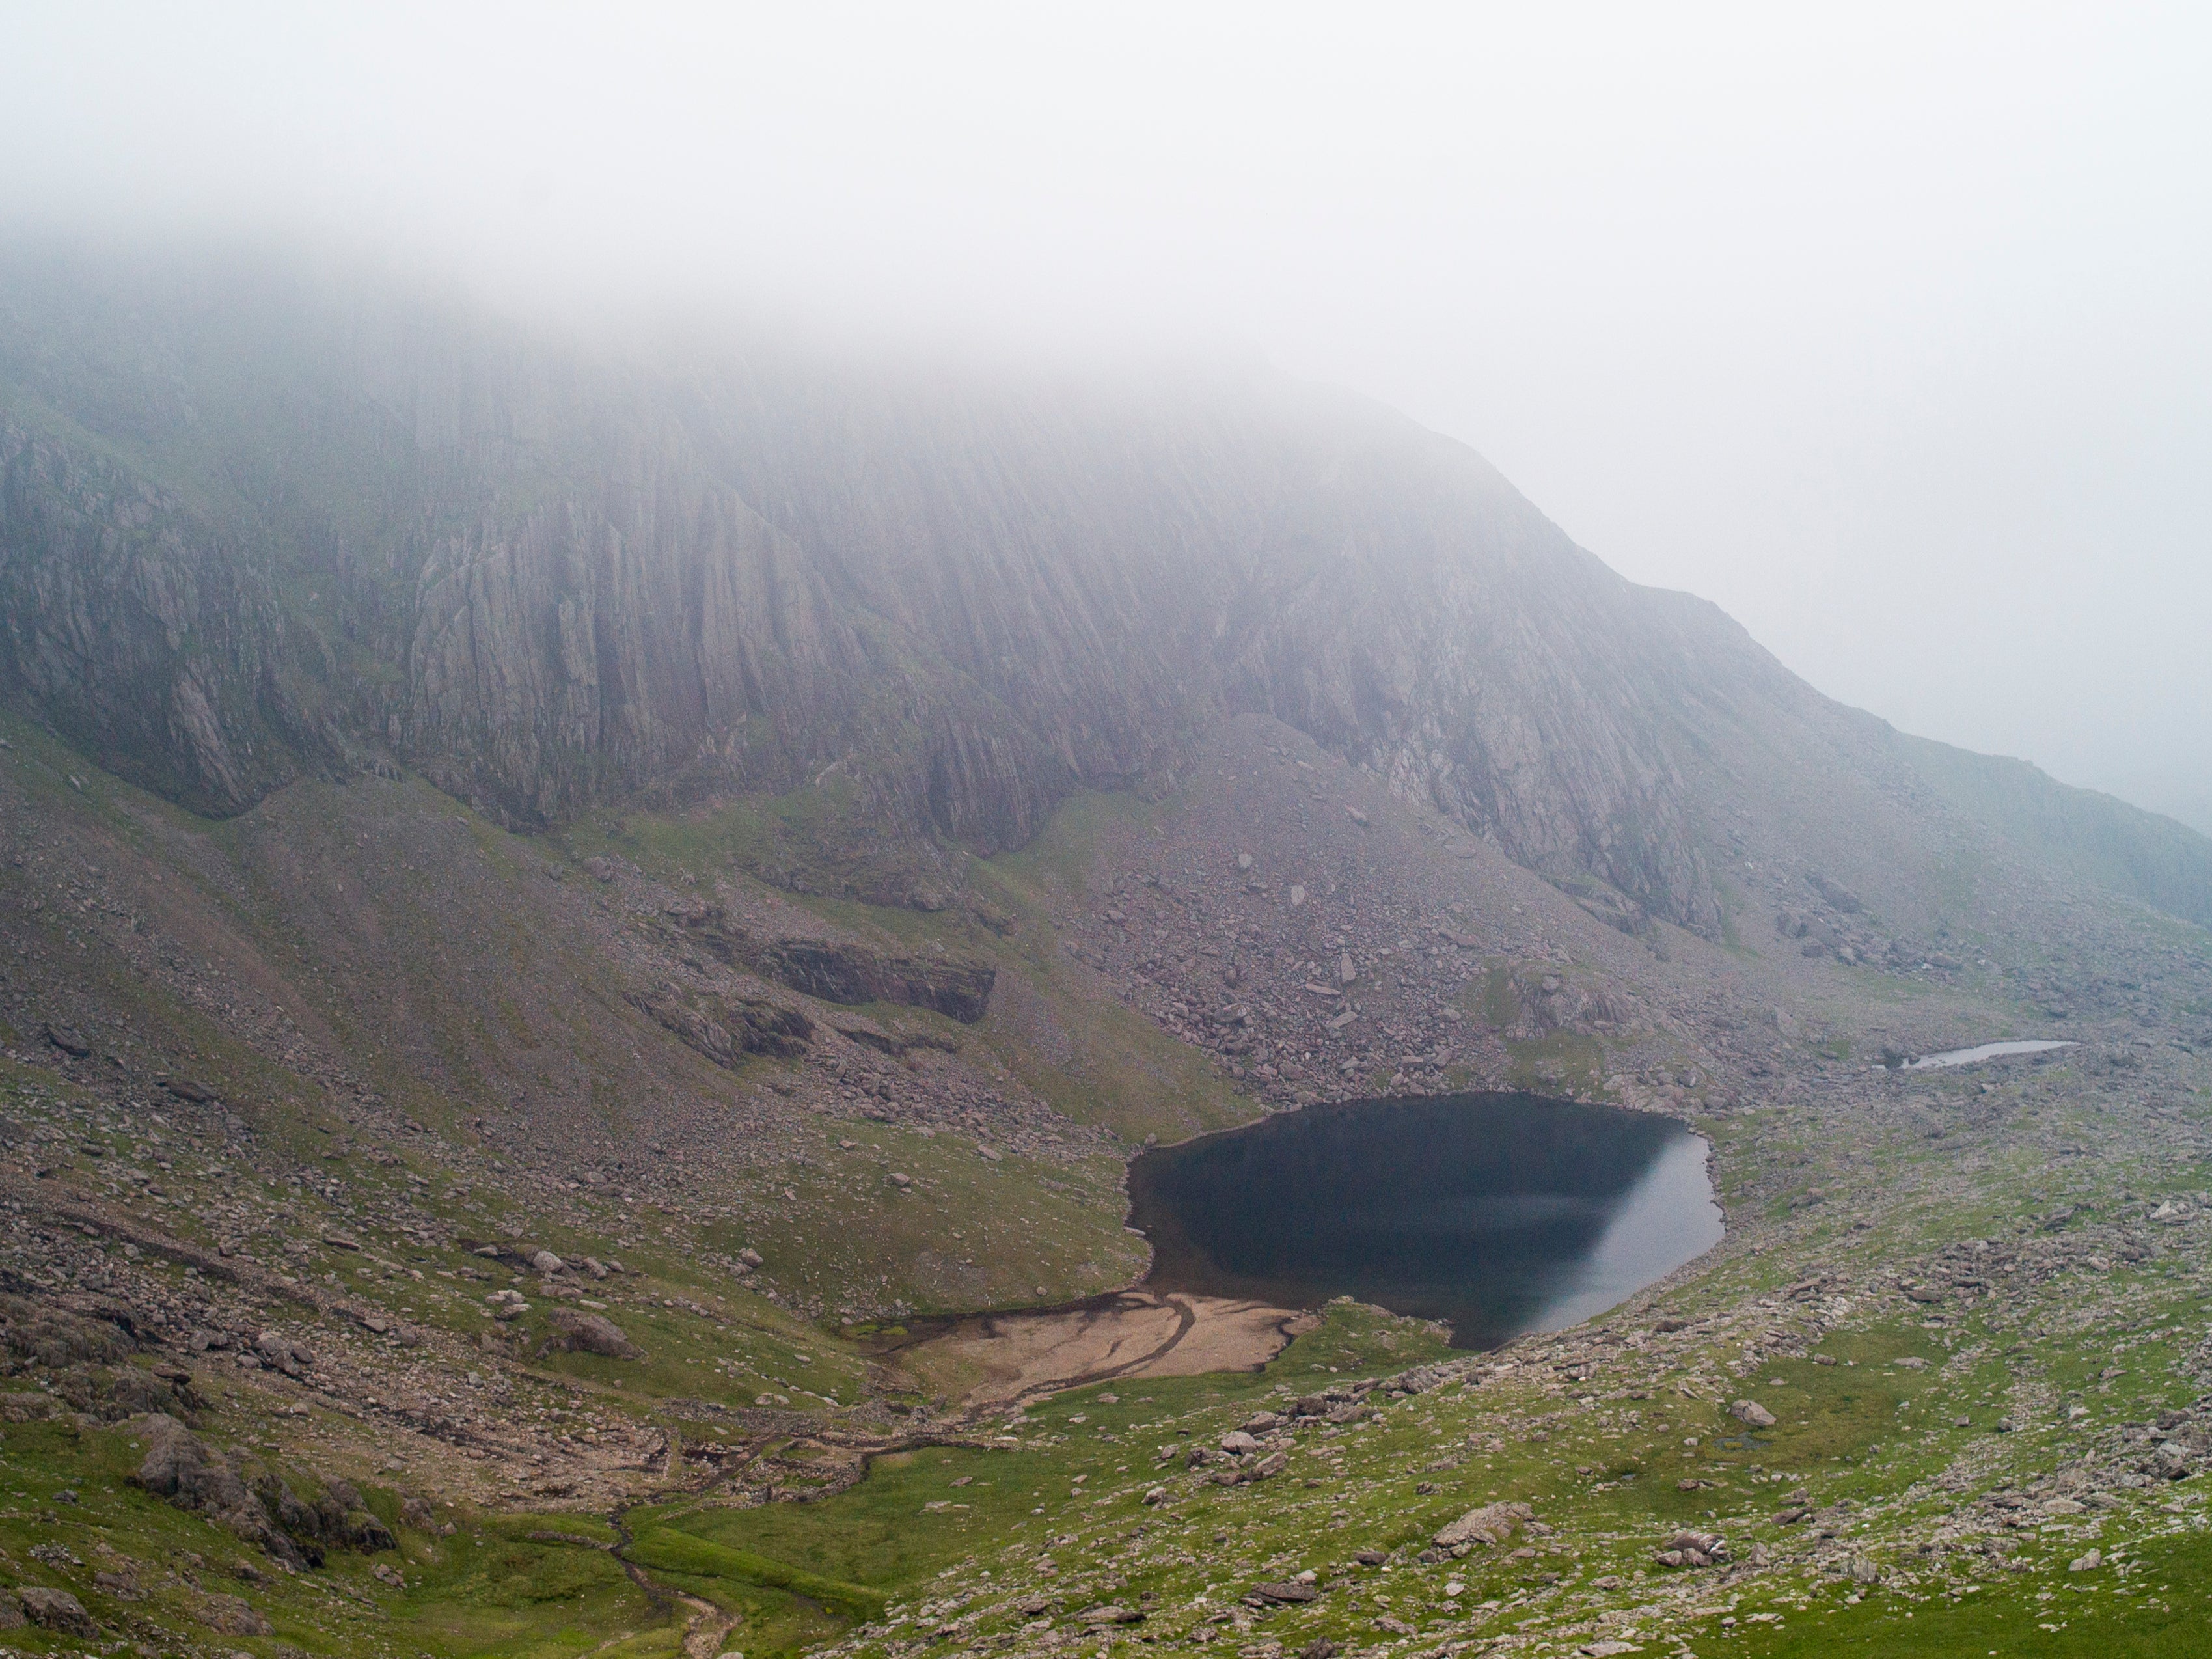 Walkers have reportedly left faeces in cups along Snowdon during the bank holiday weekend